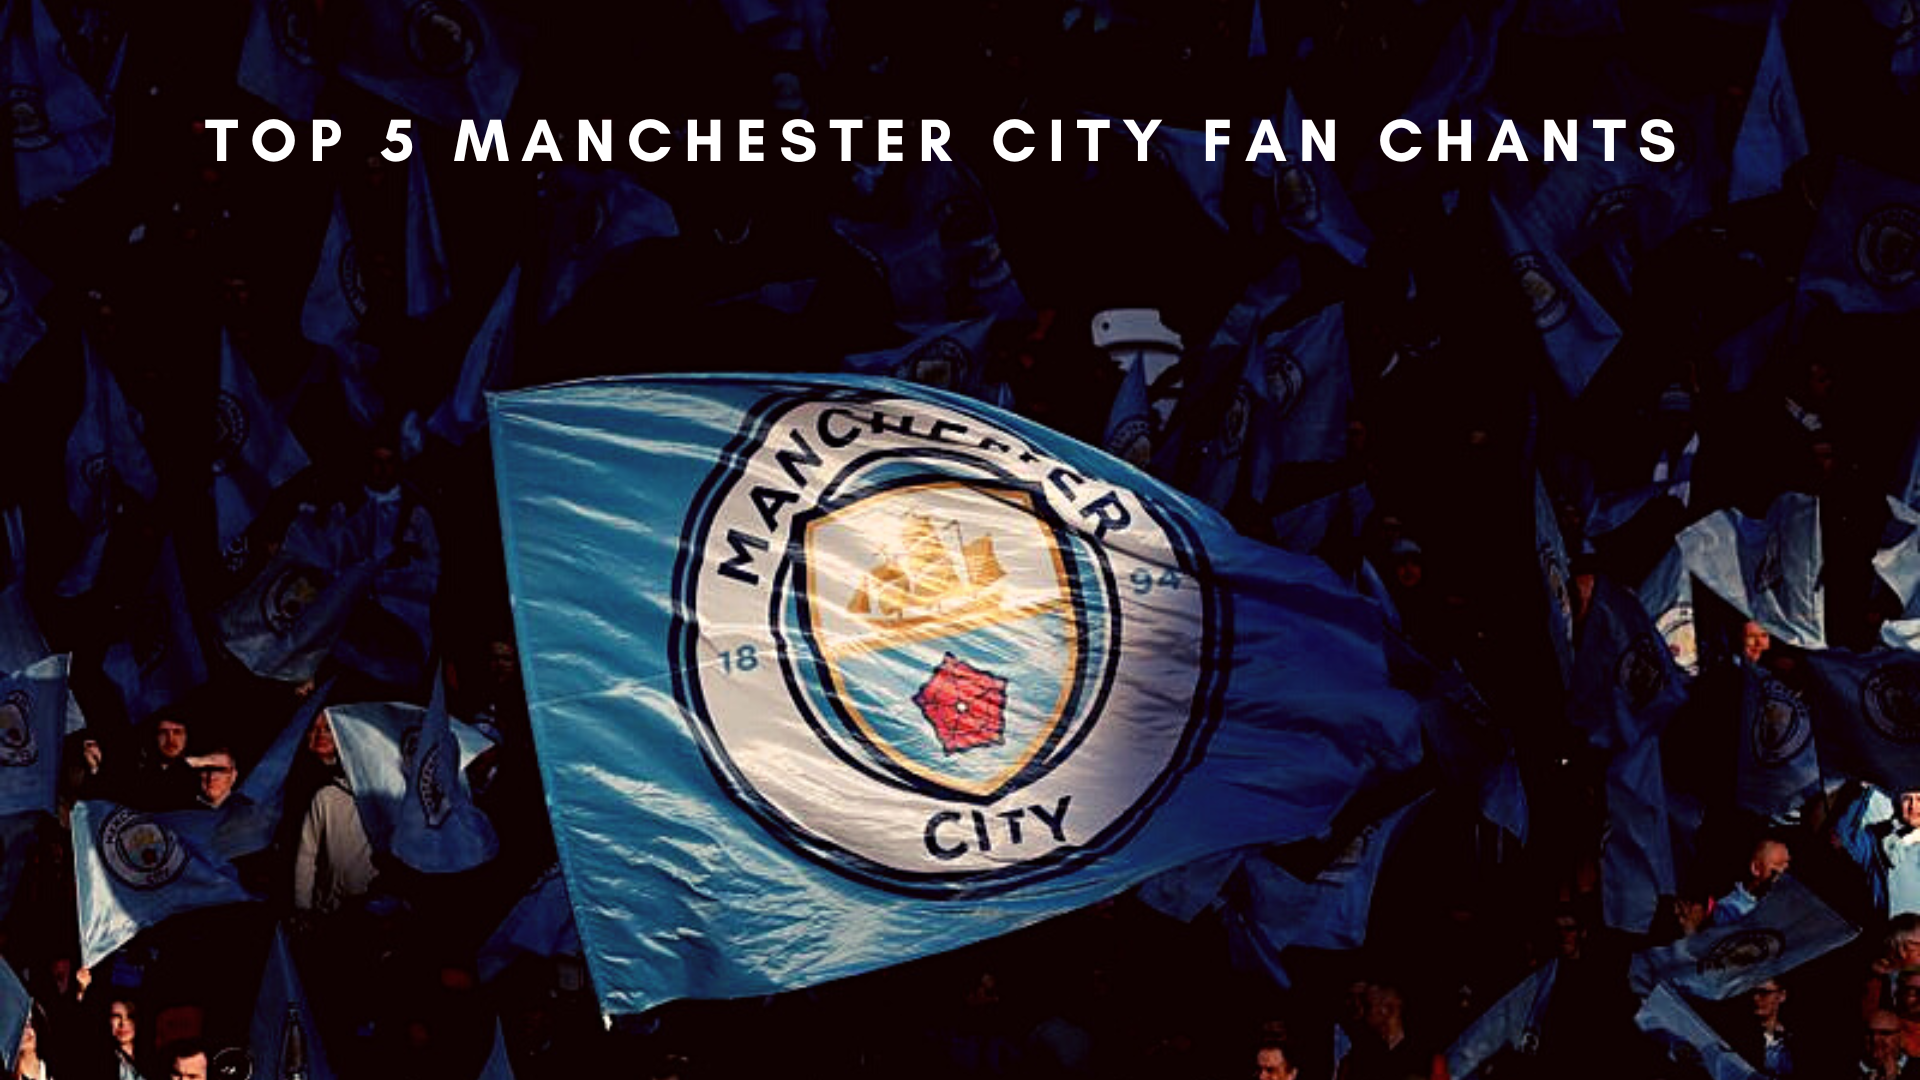 Here are the top 5 Manchester City fan chants. (Images via Reuters/Lee Smith)